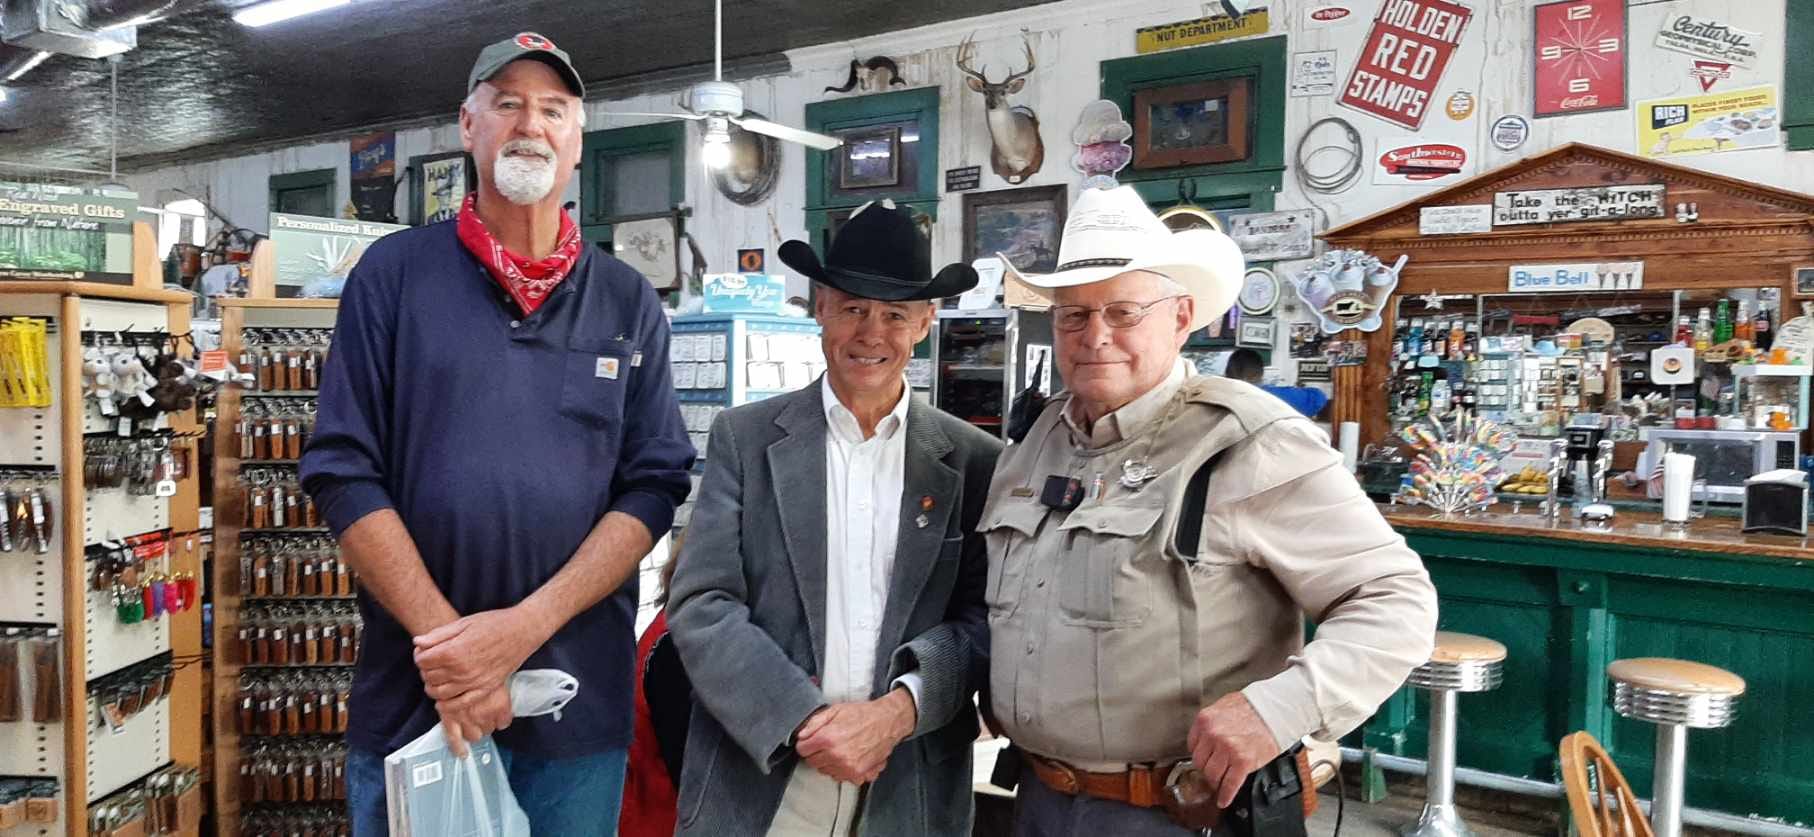 Author Ben H. English stands with two supporters at the Bandera General Store.